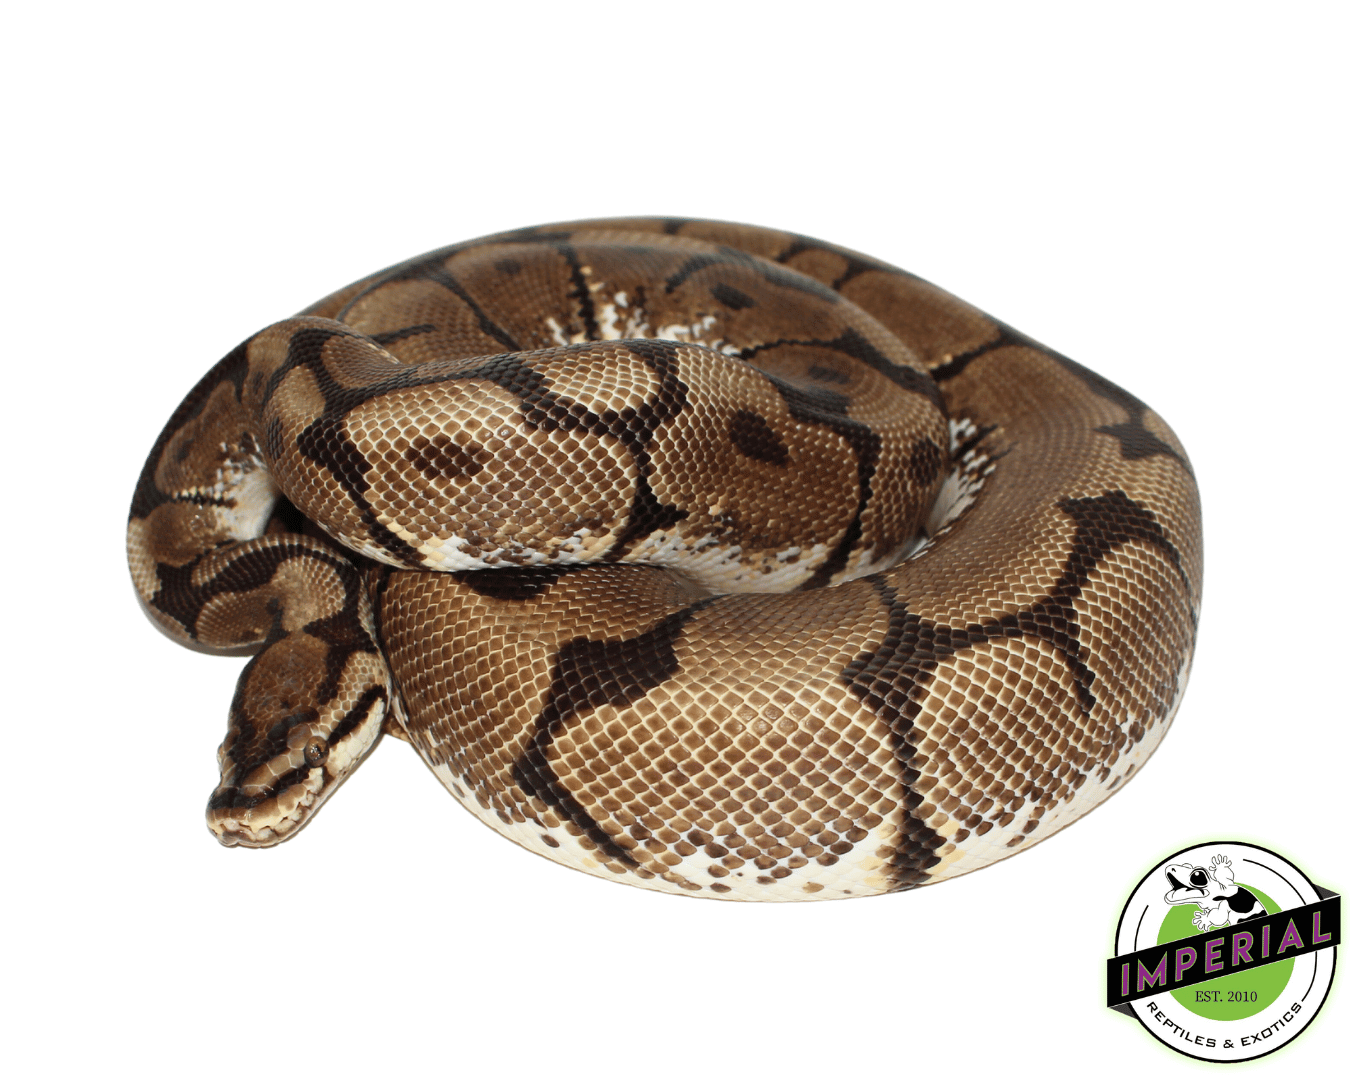 adult spider ball python for sale online, buy cheap ball pythons near me